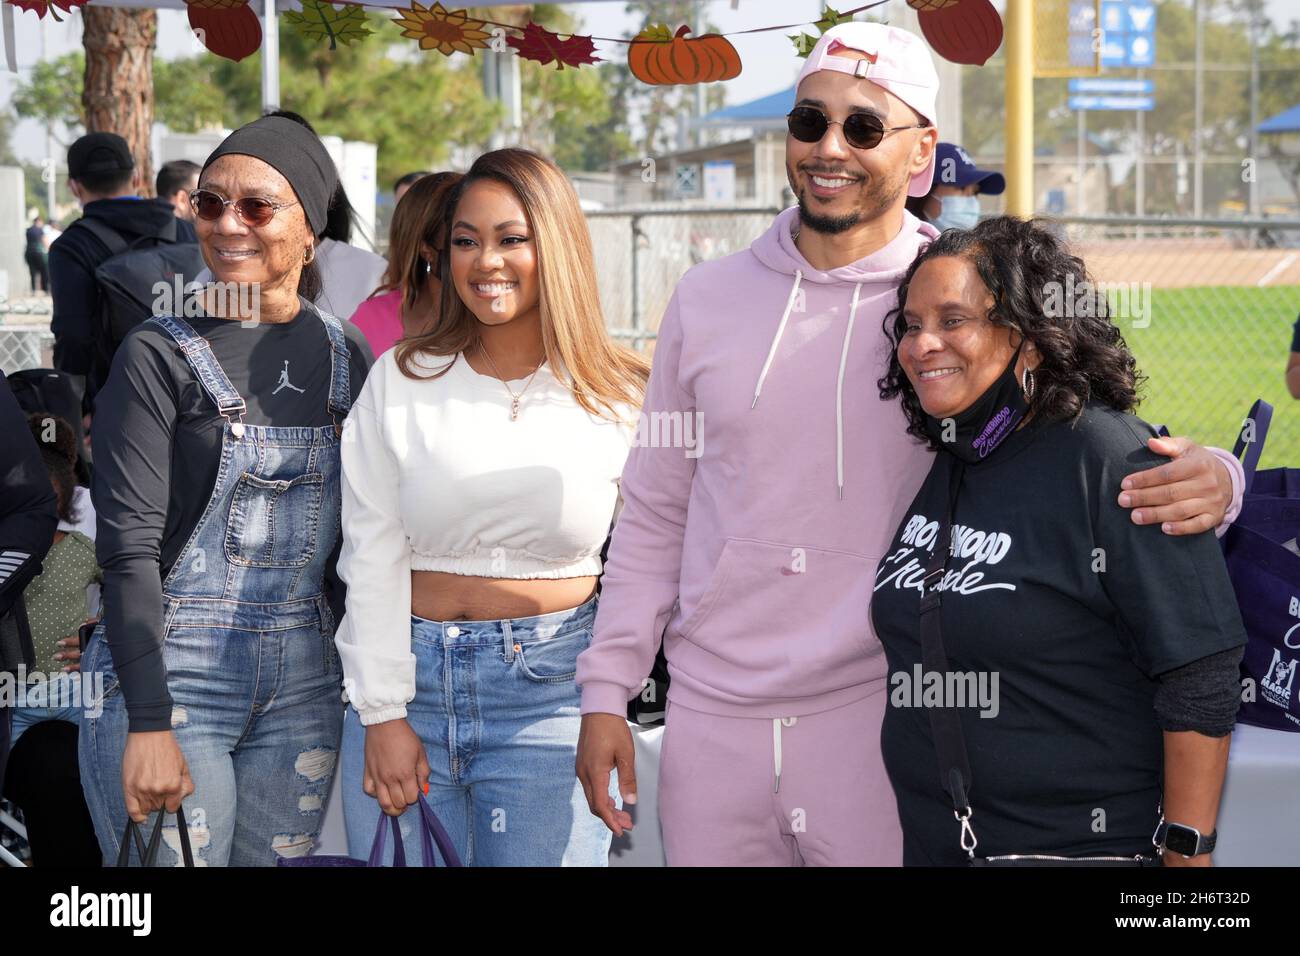 Mookie Betts & His Wife Brianna Started Dating in Middle School - FanBuzz